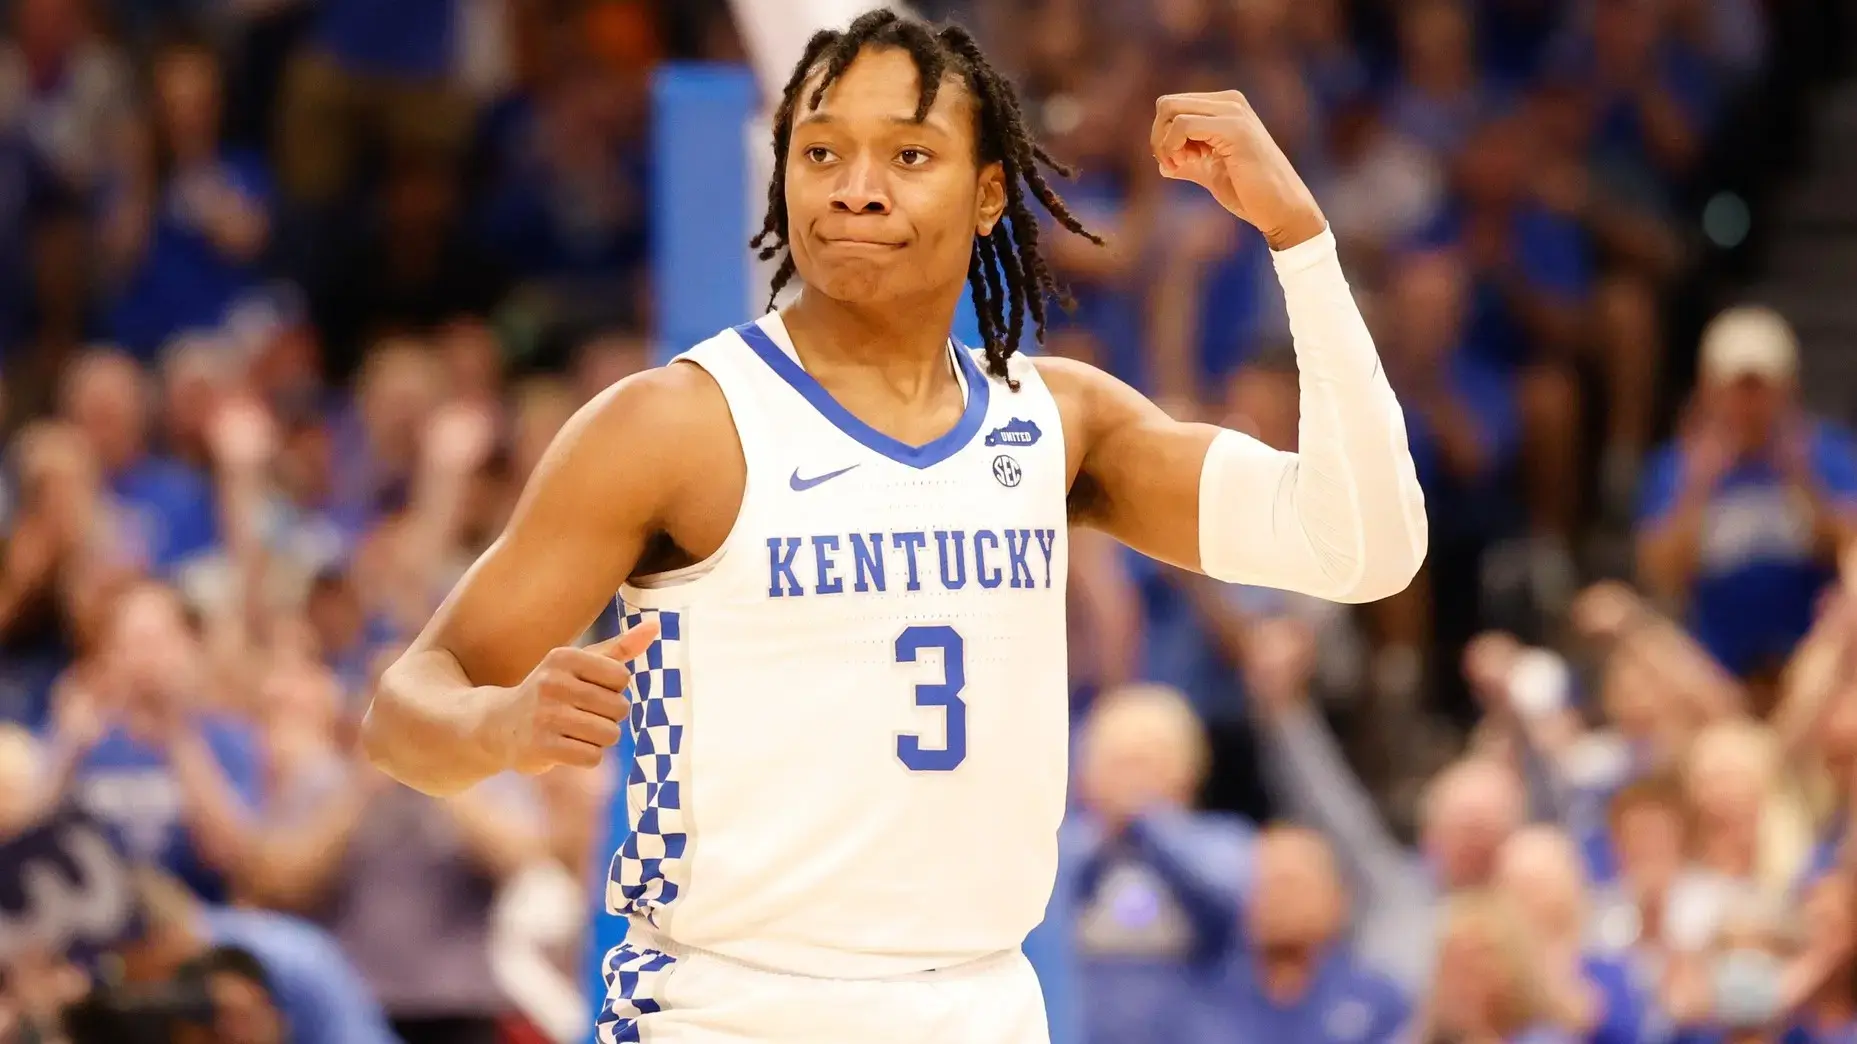 Mar 11, 2022; Tampa, FL, USA; Kentucky Wildcats guard TyTy Washington Jr. (3) reacts to a play in the first half during game against the Vanderbilt Commodores at Amelie Arena. / Nathan Ray Seebeck-USA TODAY Sports